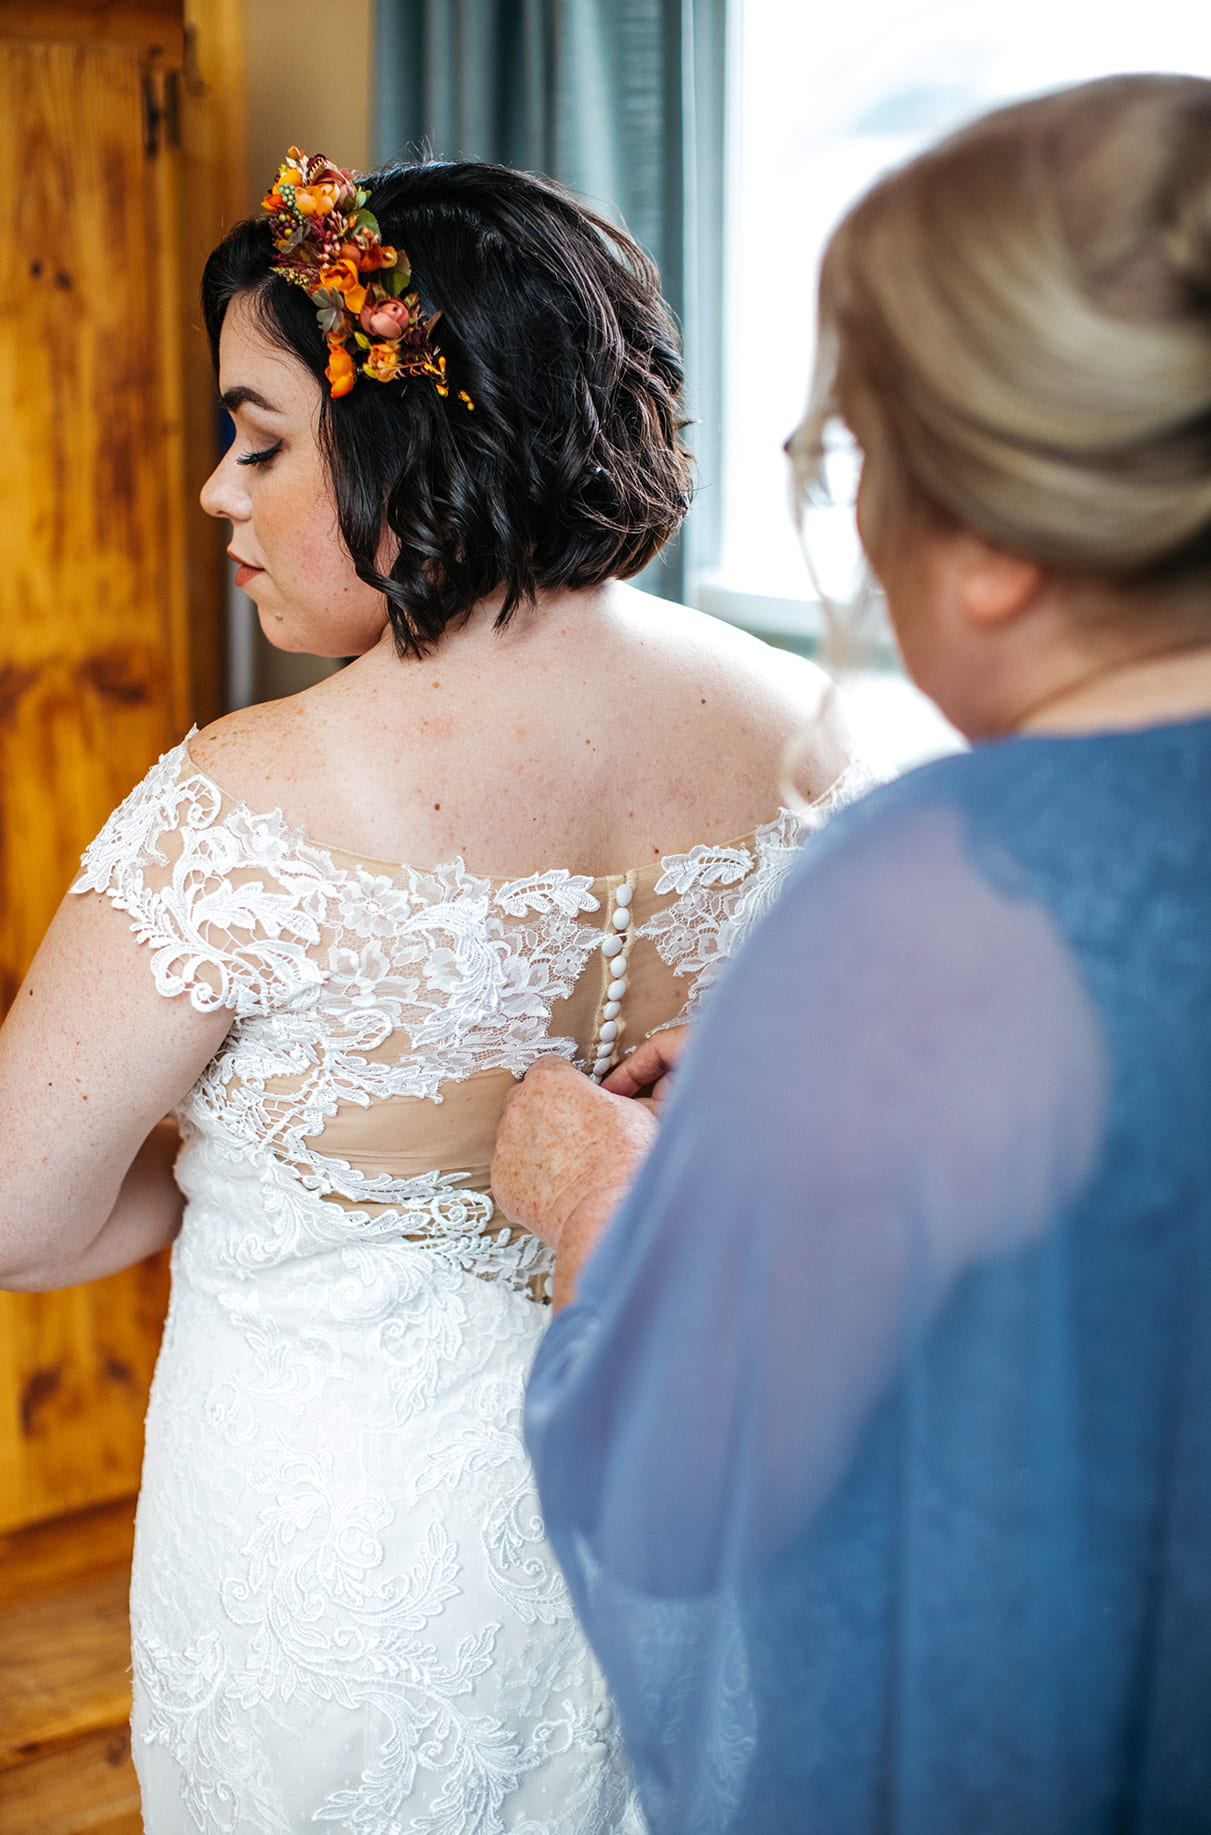 Mom zips up the back of bride's dress